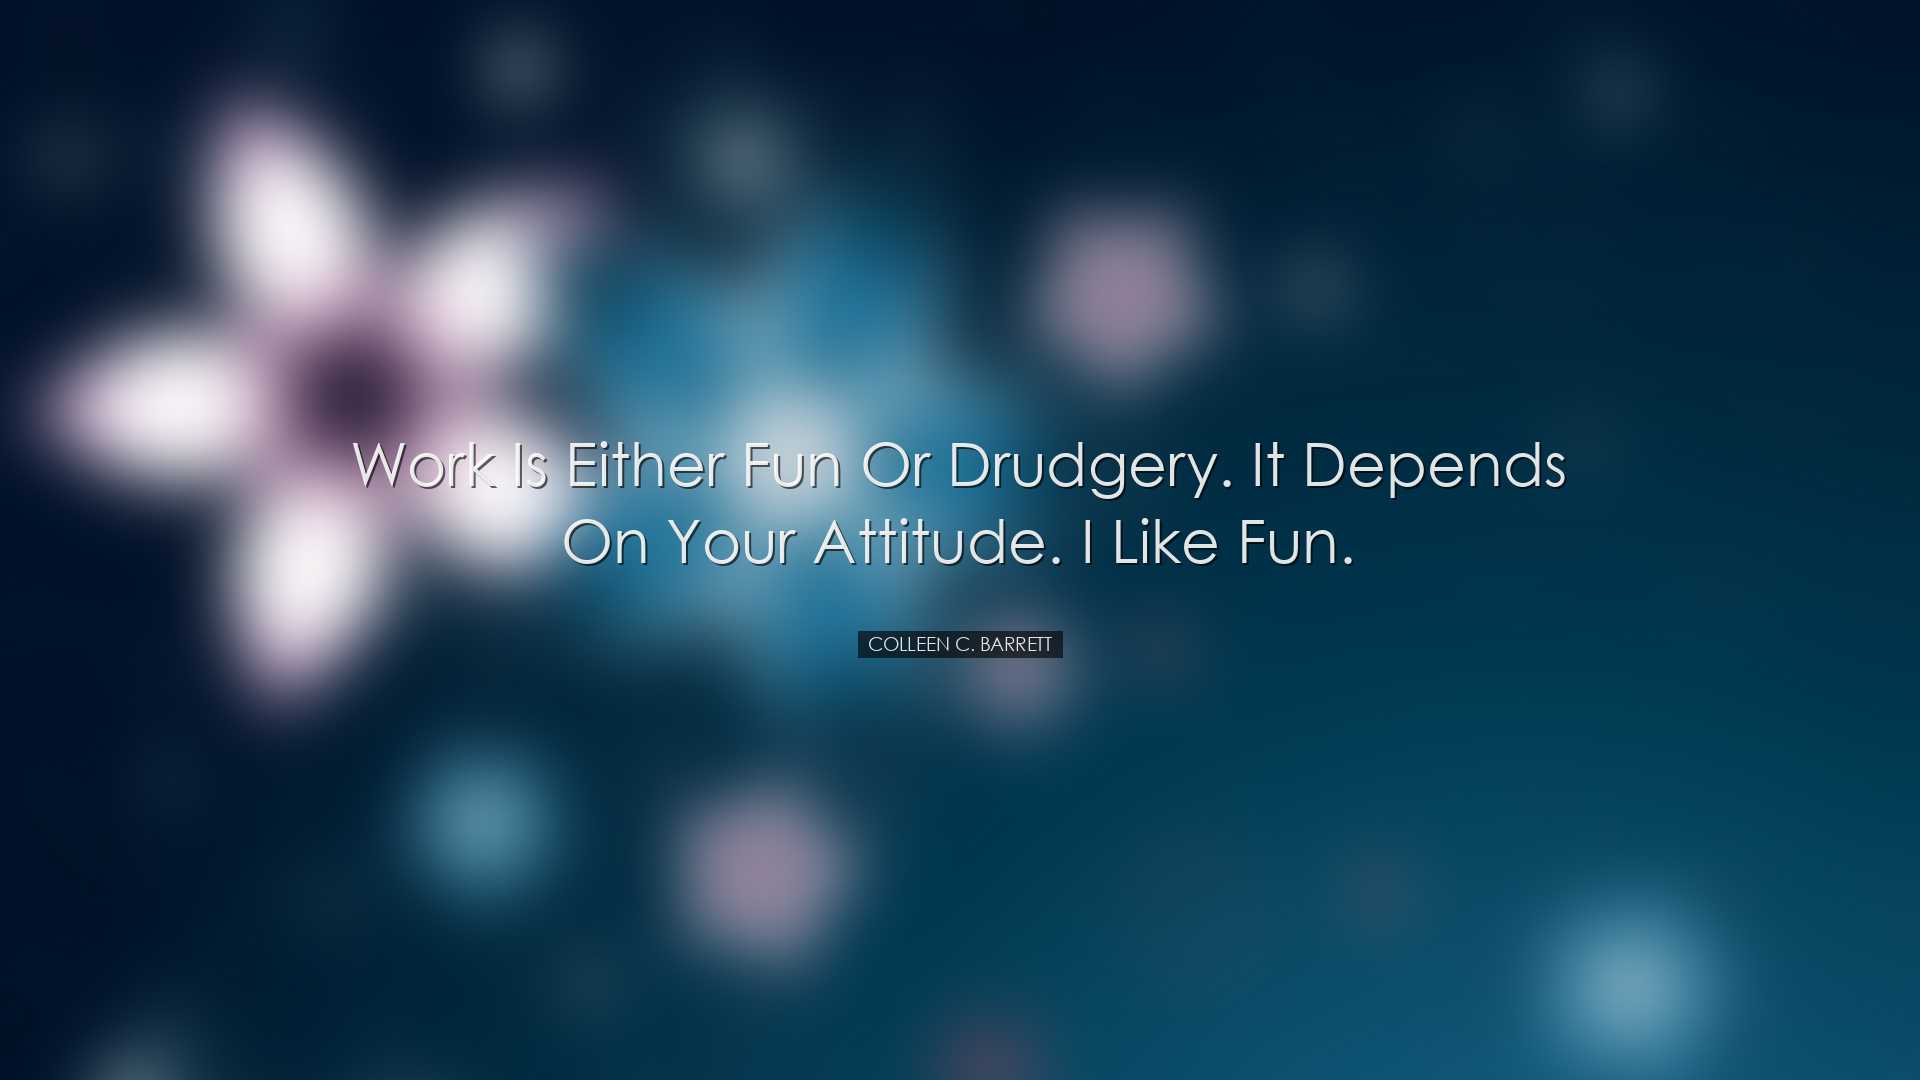 Work is either fun or drudgery. It depends on your attitude. I lik